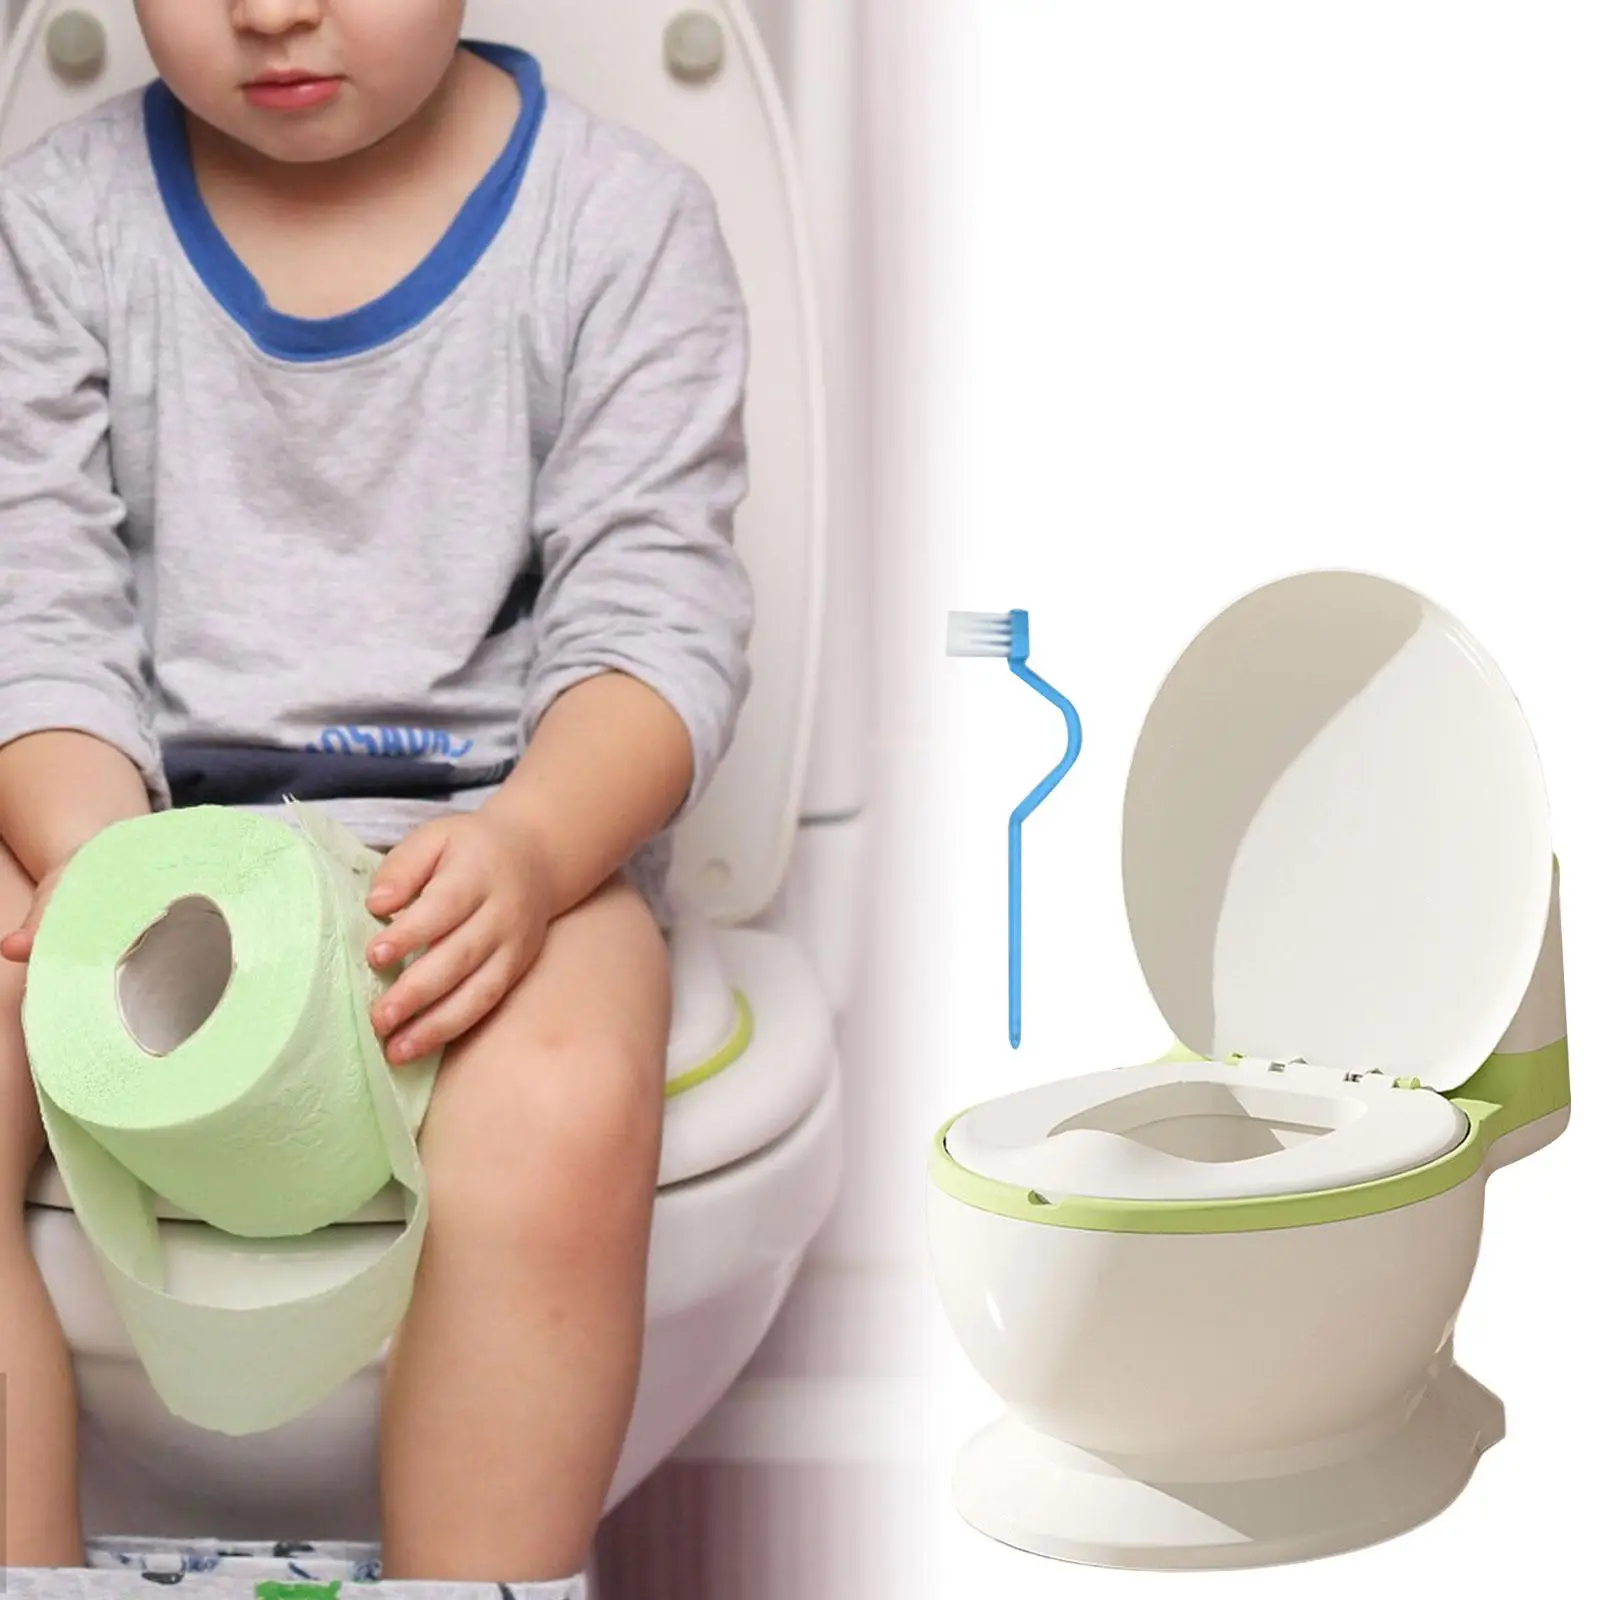 Baby Potty Toilet (Brush Included) Training Transition Potty Seat Realistic Toilet Removable Potty Pot for Bedroom Girls Boys